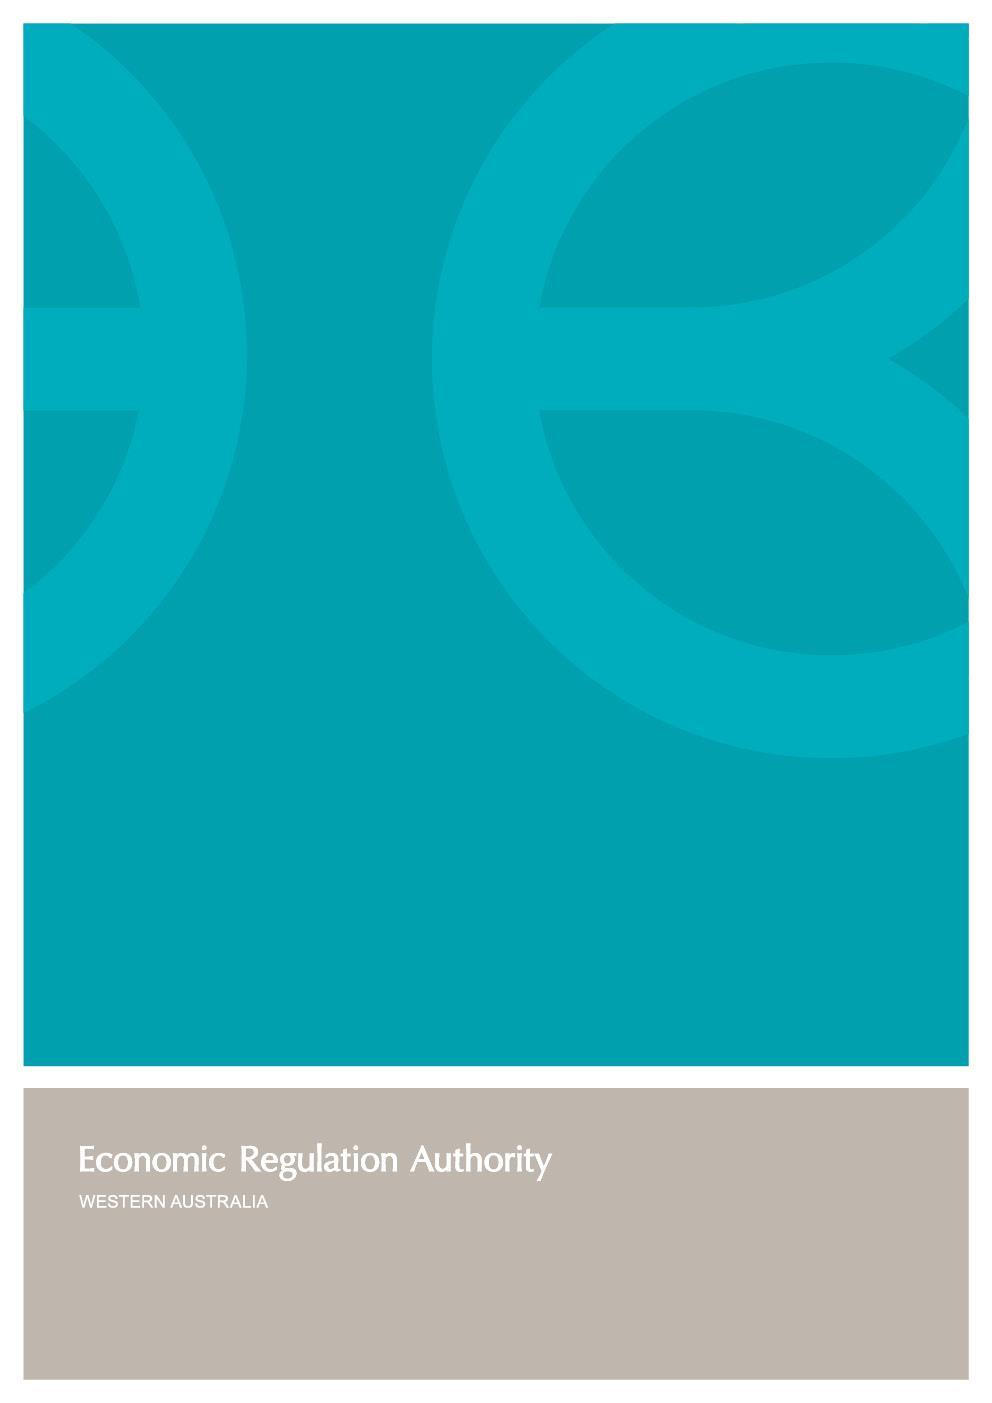 Inquiry into reform of business licensing in Western Australia Consultation paper 2: Analytical framework and